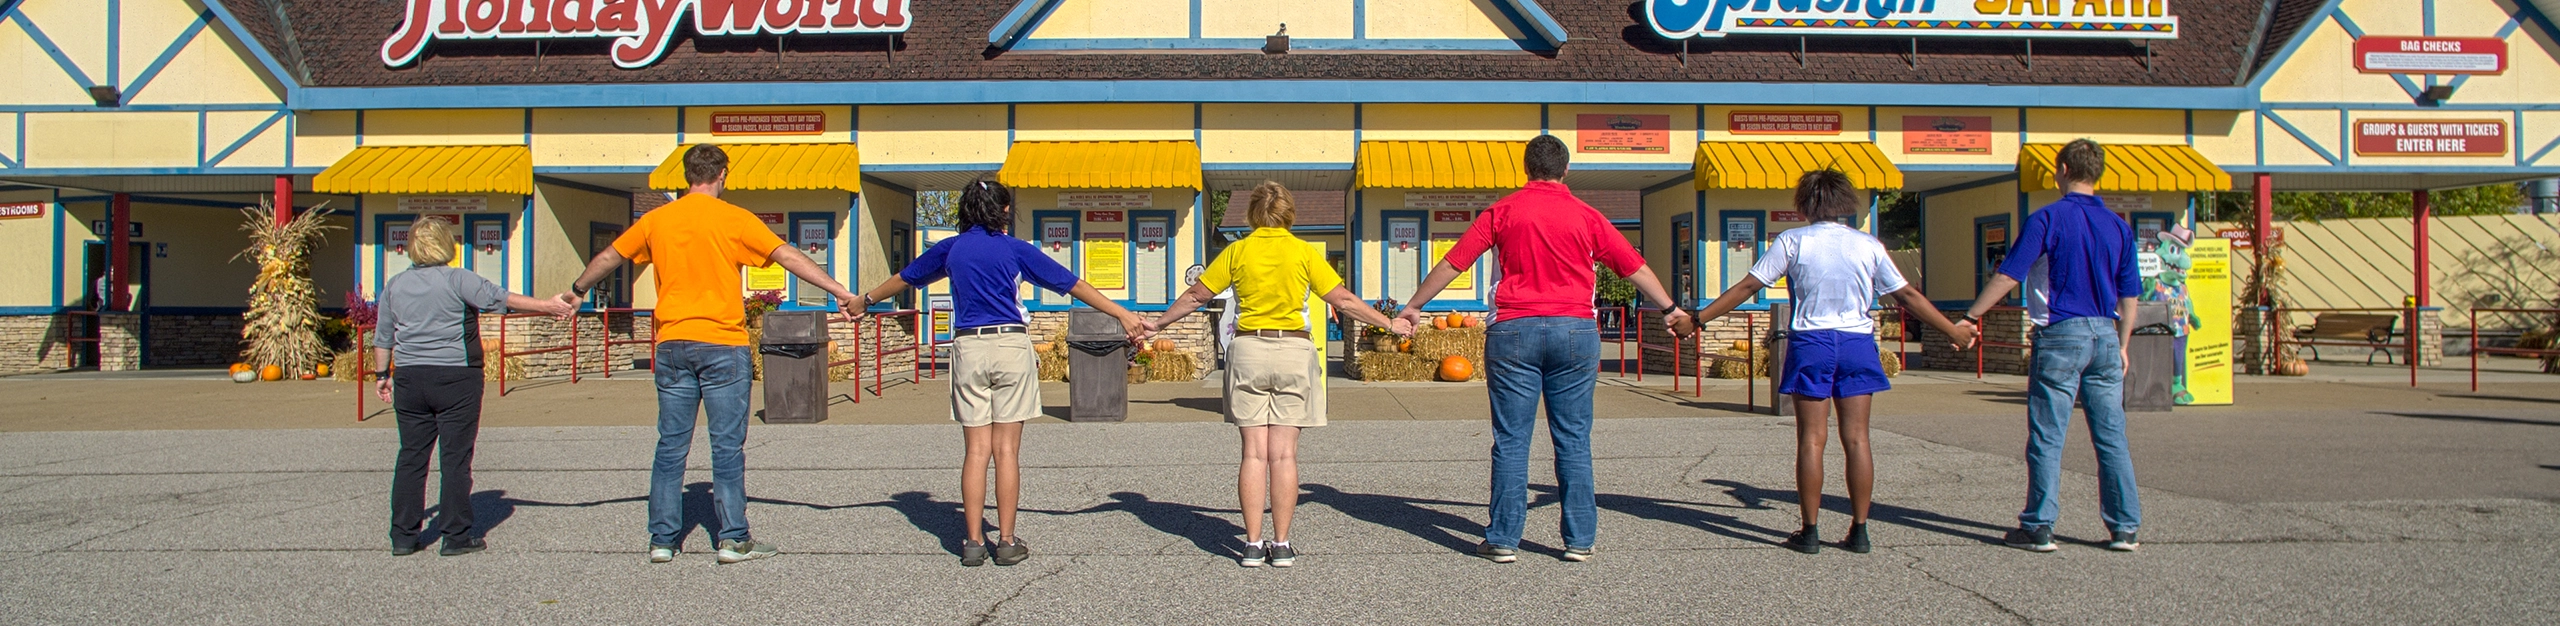 Team Members holding hands in front of the Front Gate at Holiday World & Splashin' Safari.